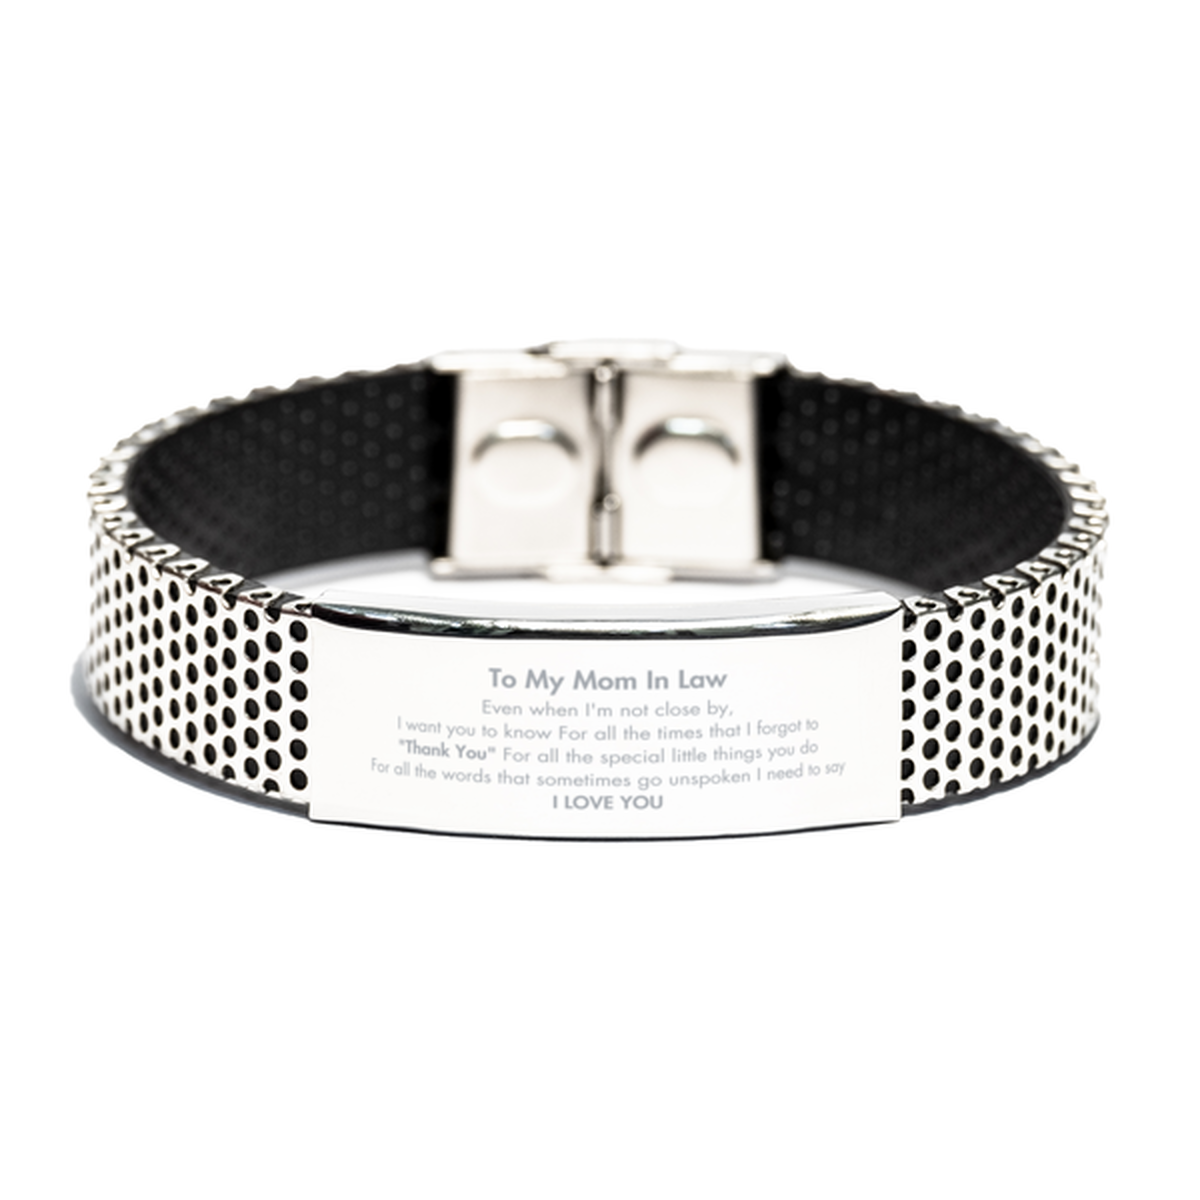 Thank You Gifts for Mom In Law, Keepsake Stainless Steel Bracelet Gifts for Mom In Law Birthday Mother's day Father's Day Mom In Law For all the words That sometimes go unspoken I need to say I LOVE YOU